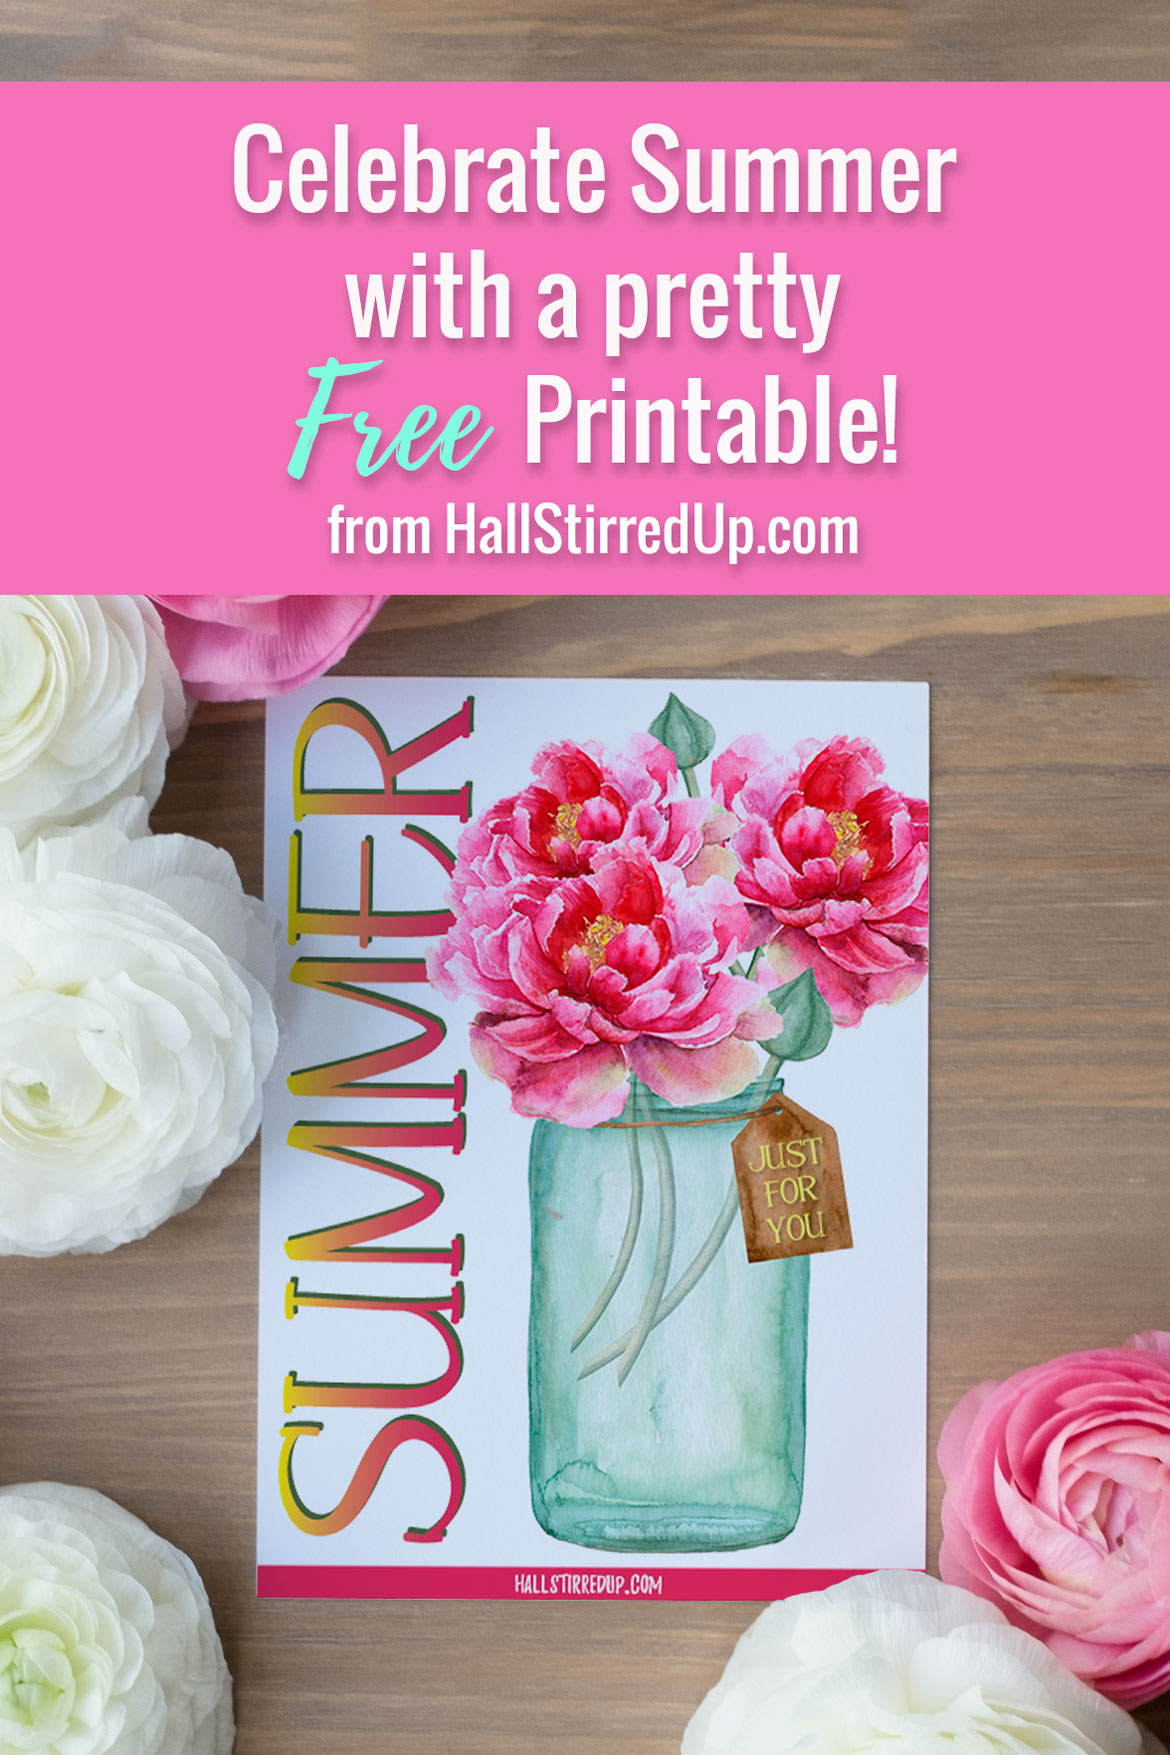 Top ten favorites for Summer includes a free printable